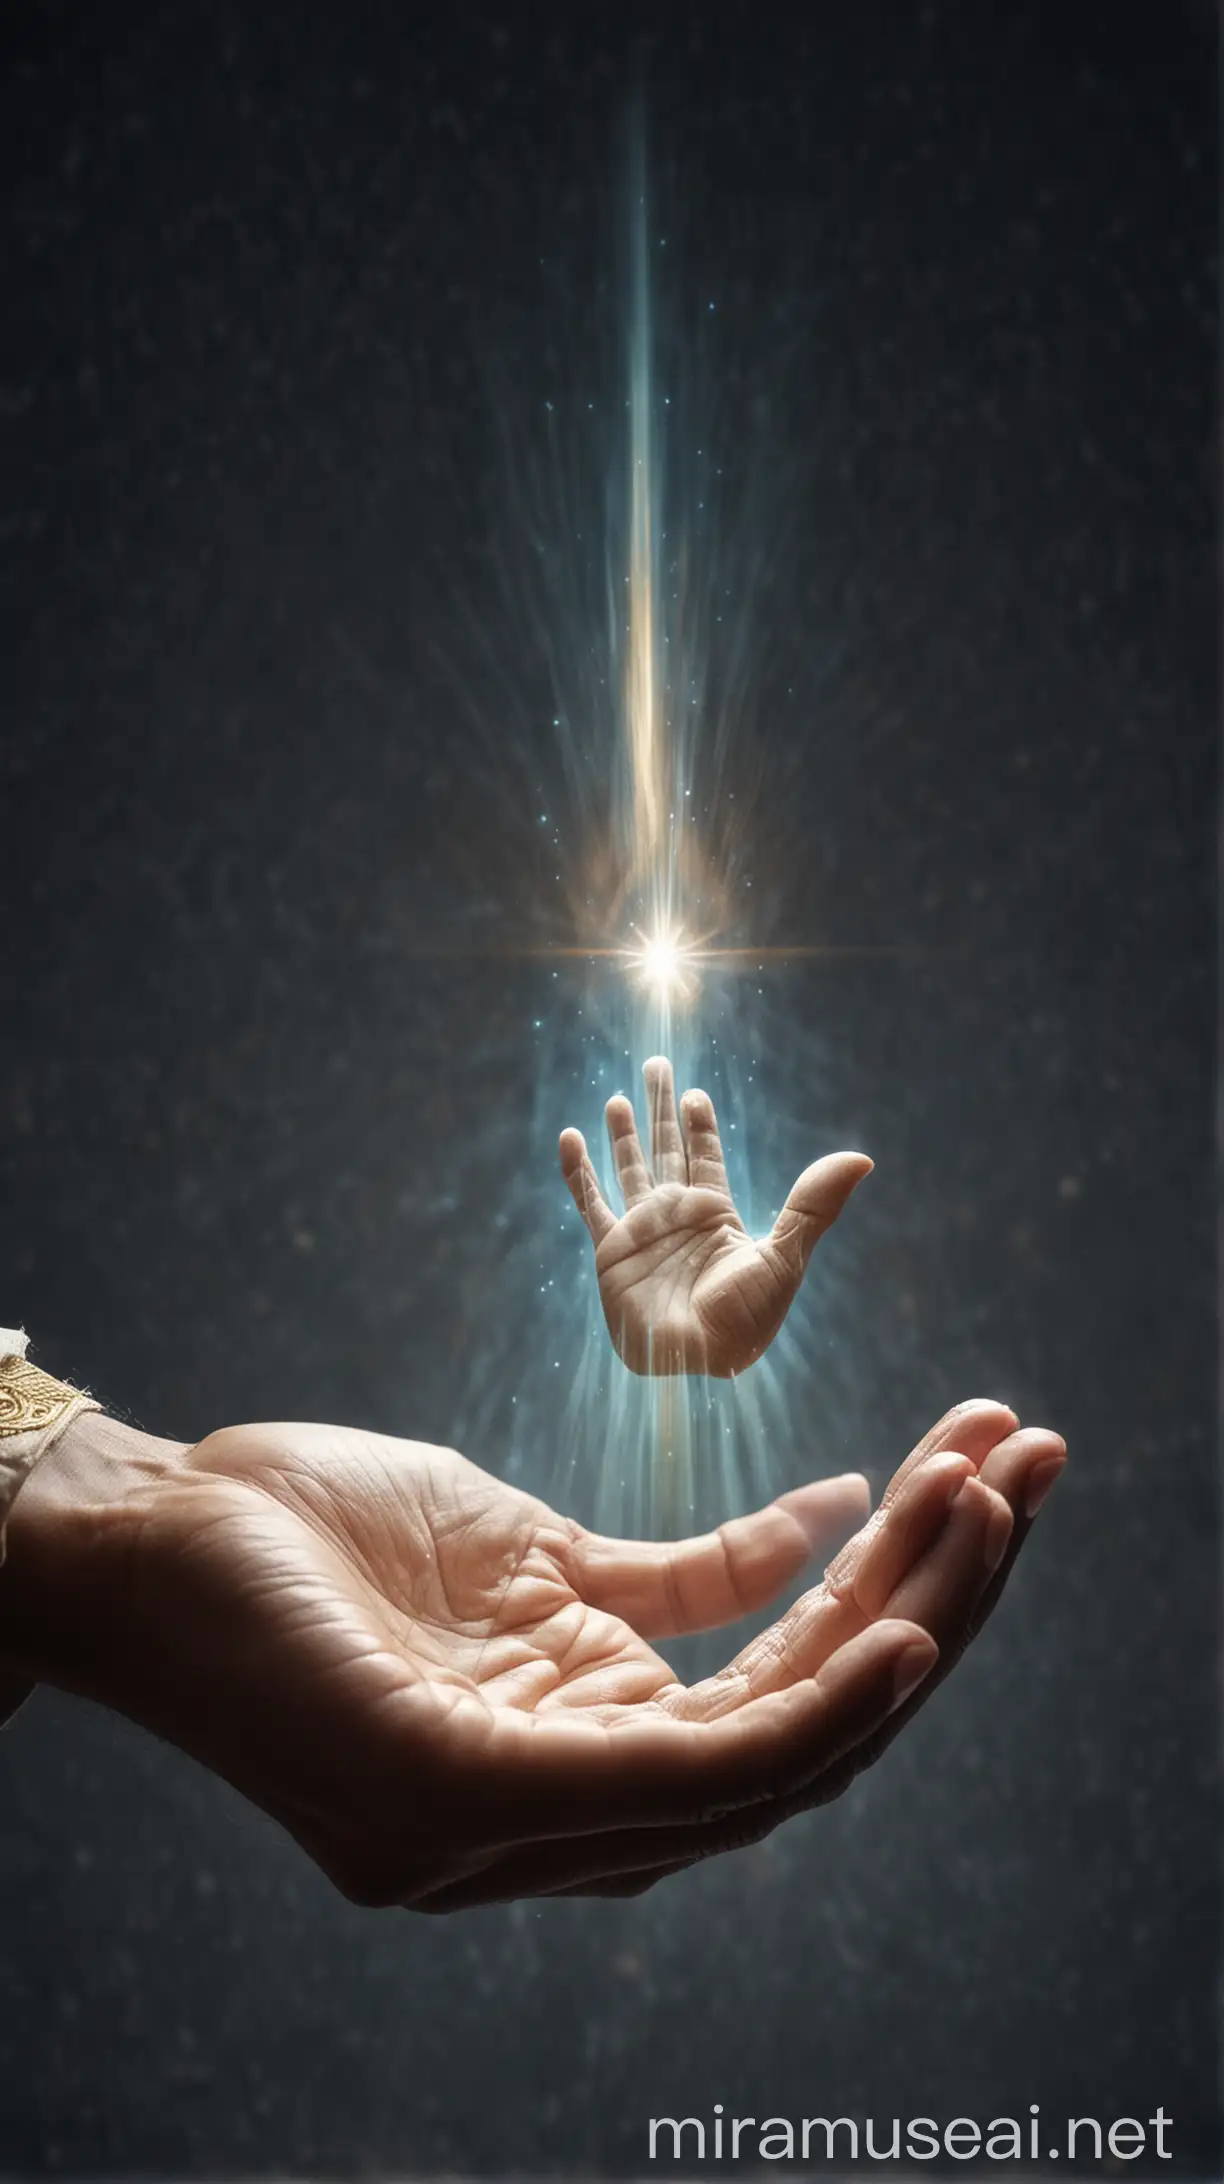 The Mercy to Mankind: Depict an outstretched hand offering help and support to those in need, with a glowing aura surrounding it, signifying the mercy and compassion of the Prophet Muhammad (peace be upon him).
